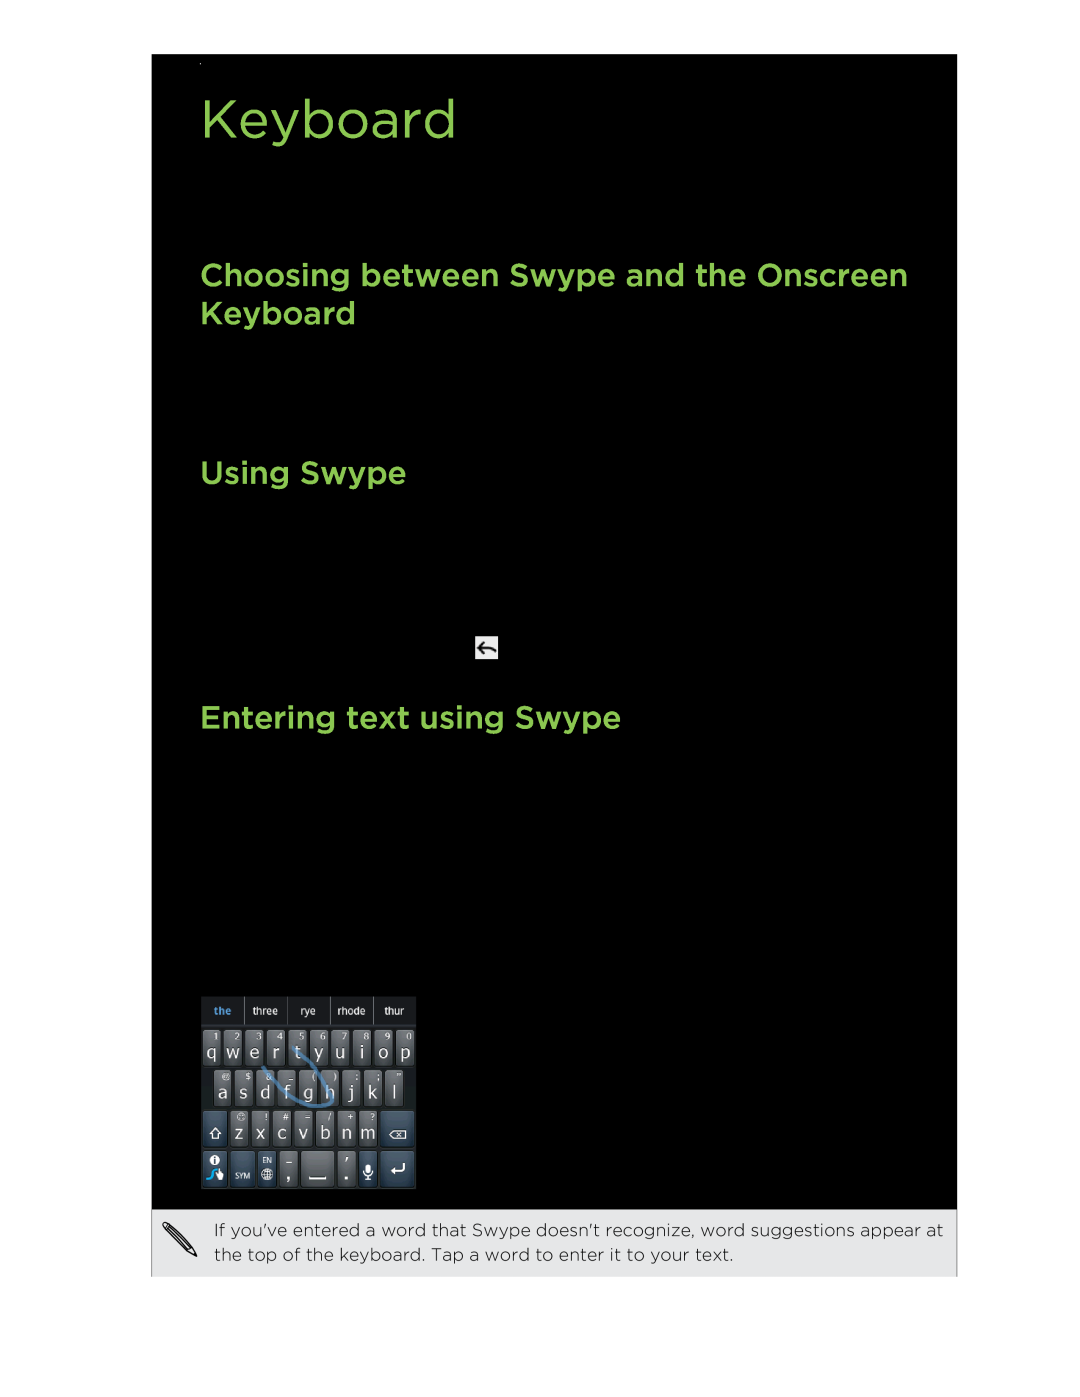 HTC manual Choosing between Swype and the Onscreen Keyboard, Using Swype, Entering text using Swype 